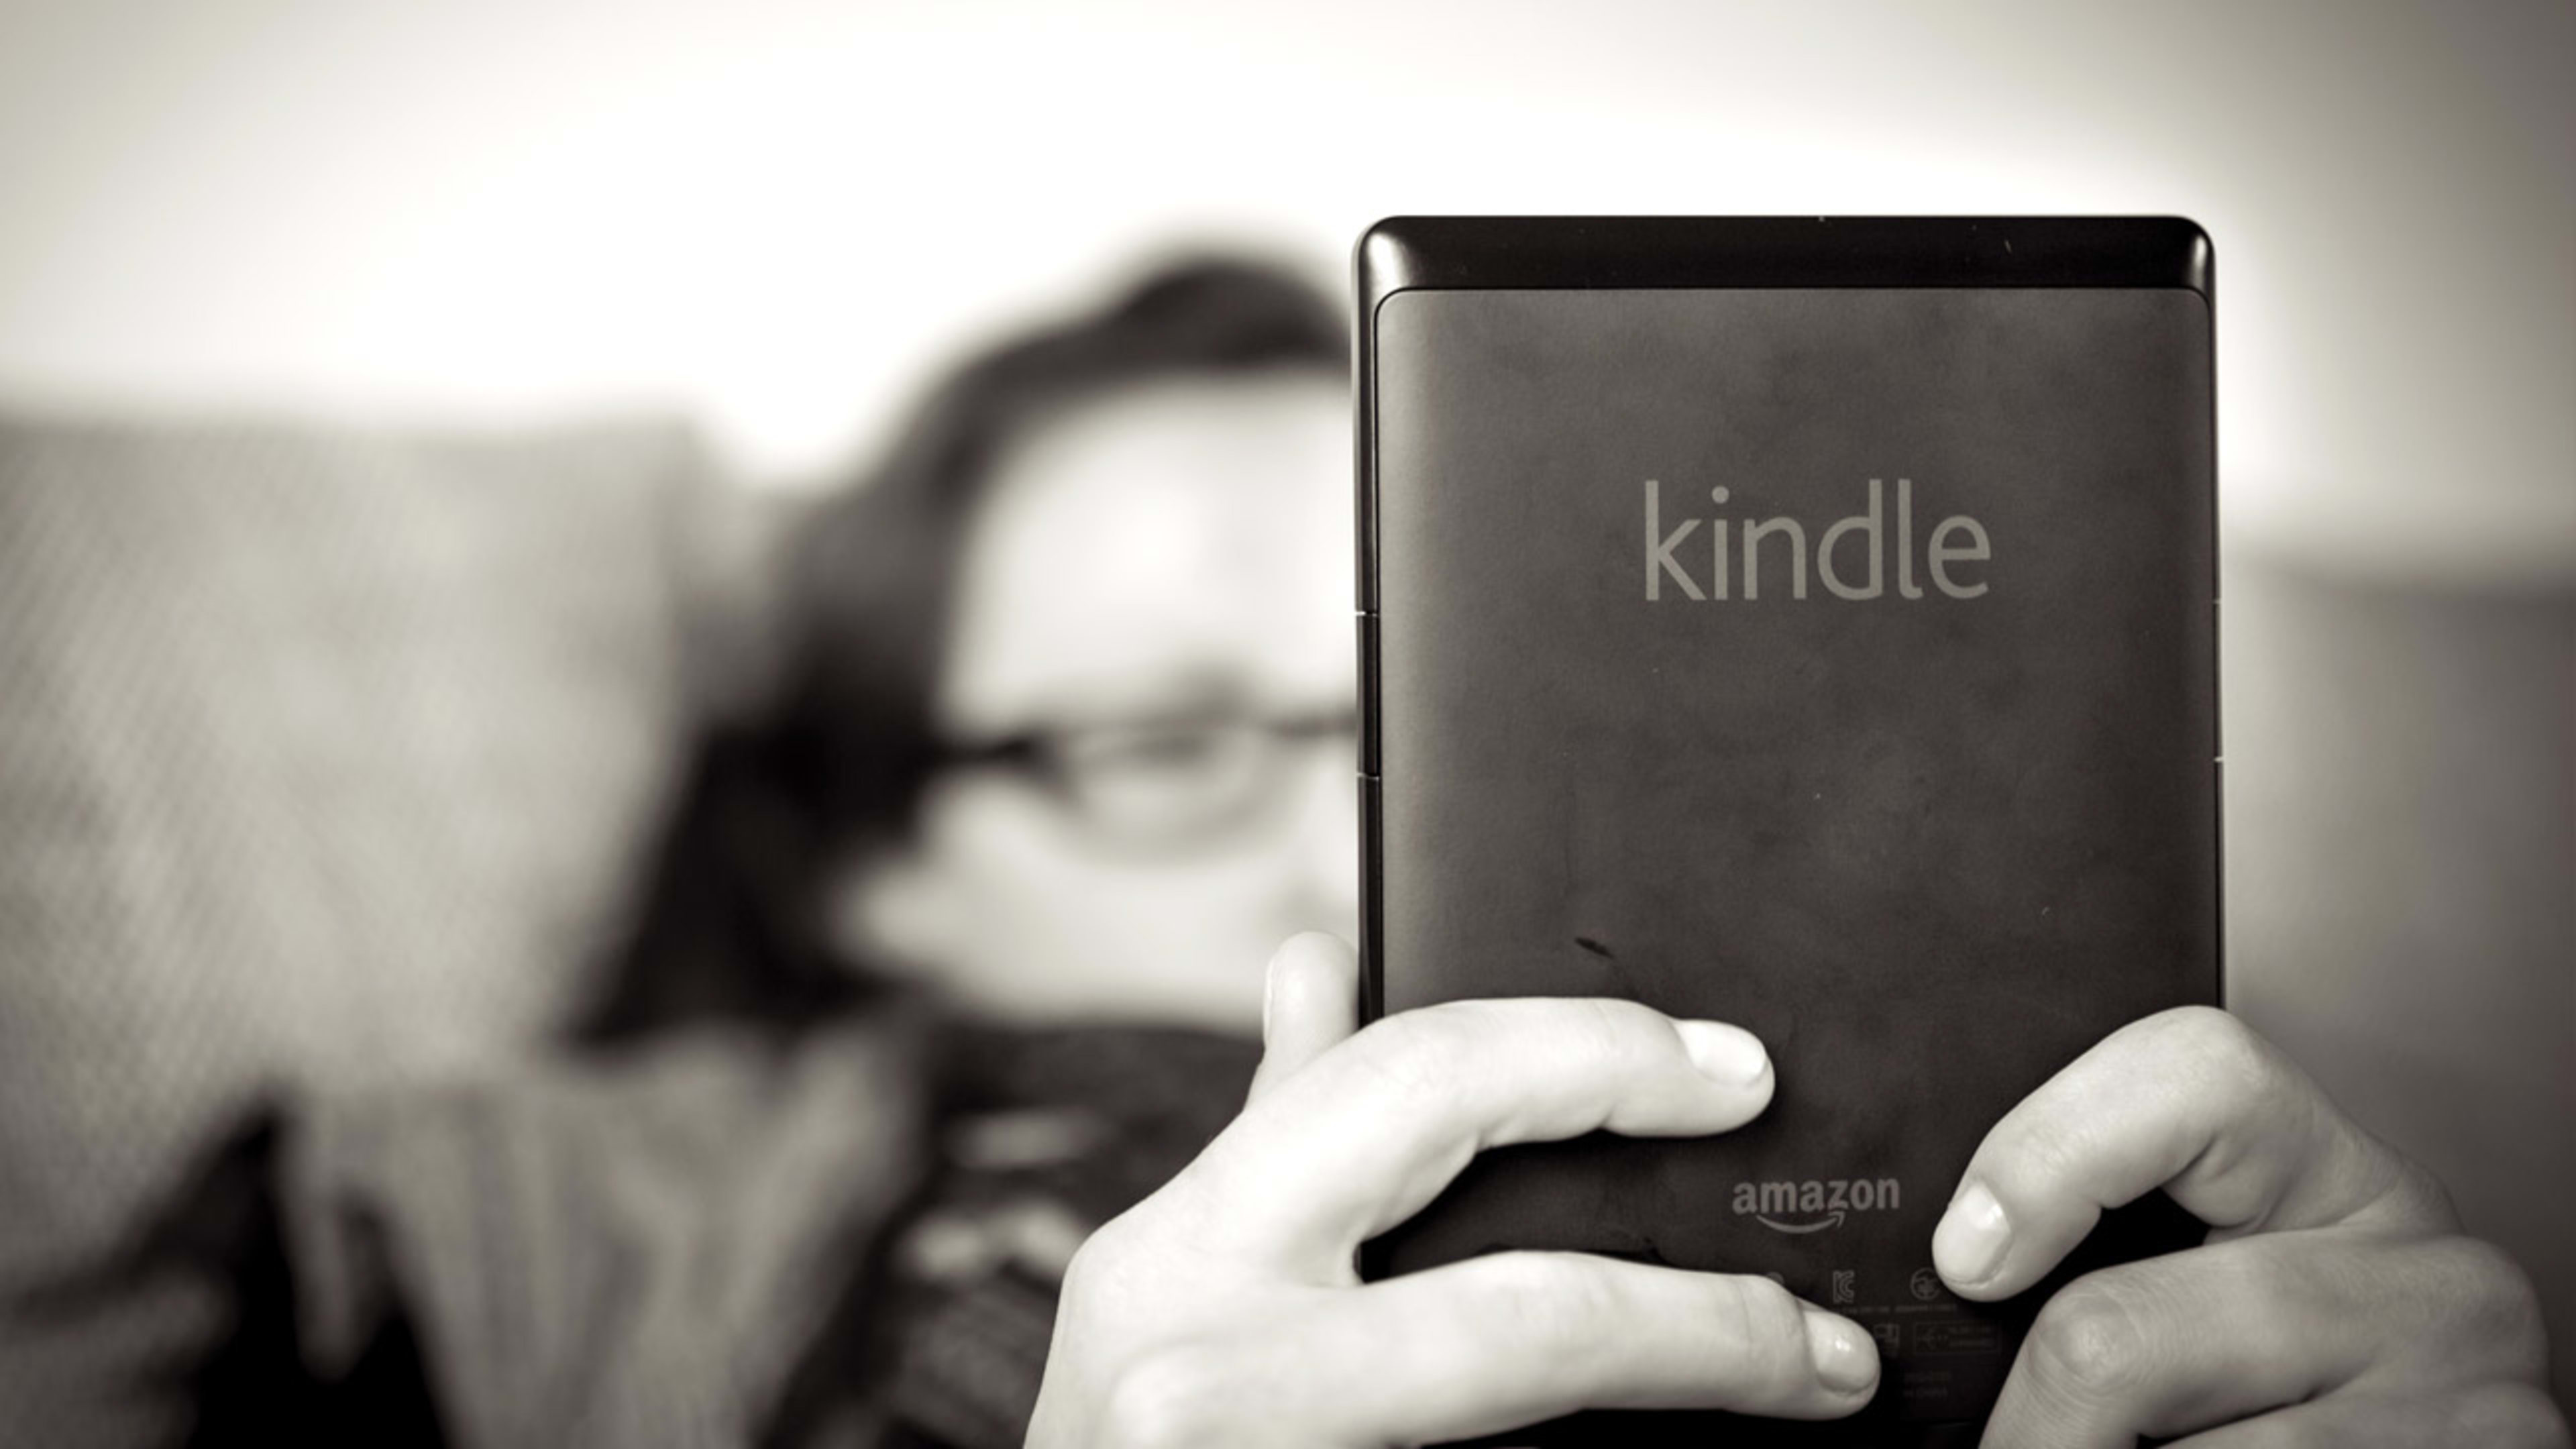 Own A Pre-2012 Kindle? Update Your Device ASAP Or Risk Losing Wi-Fi Access